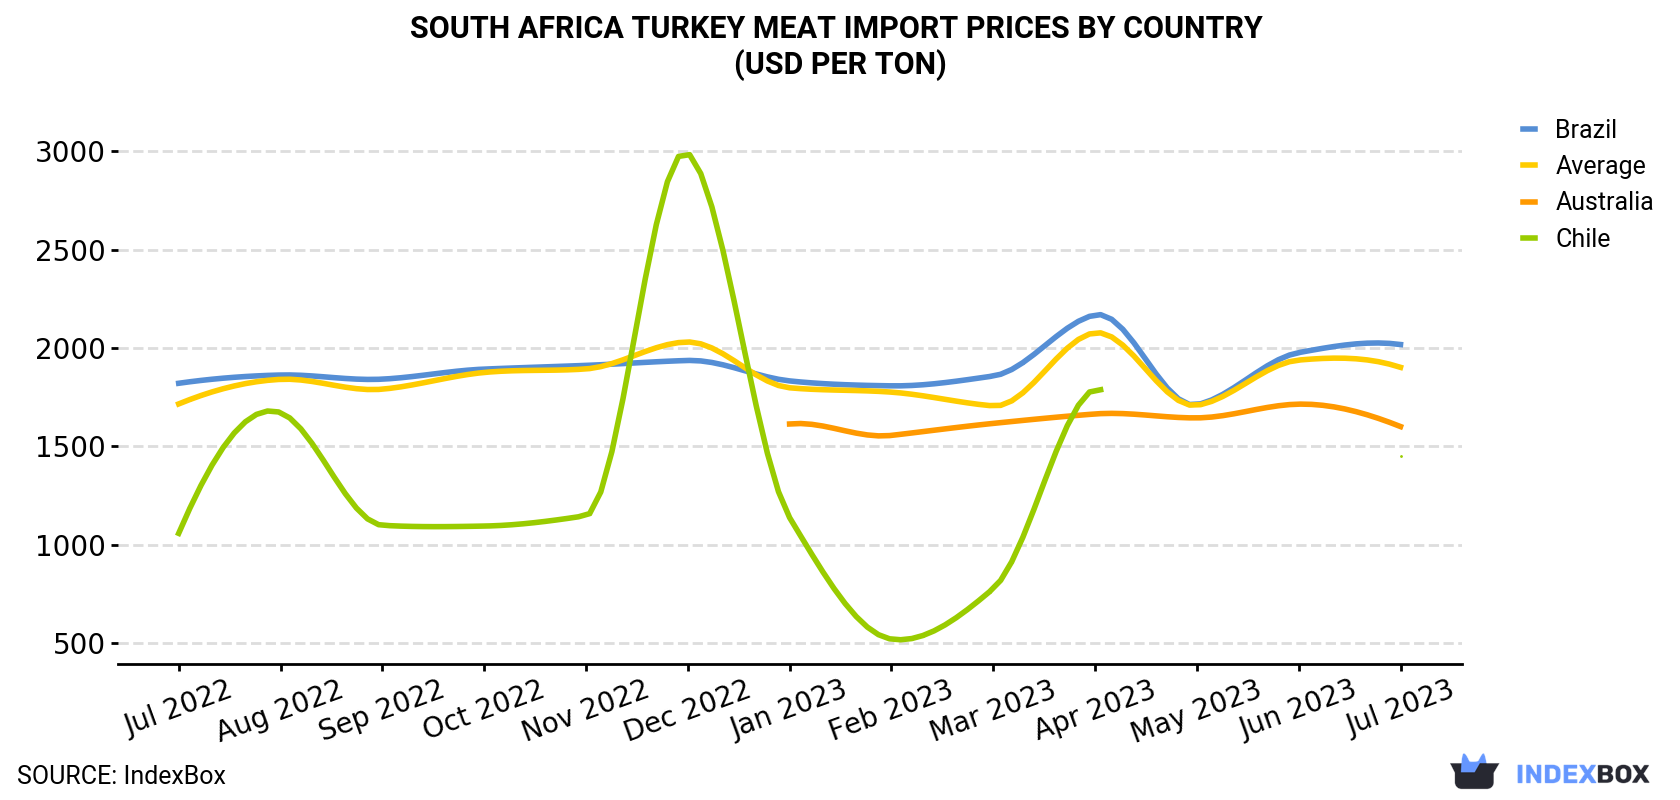 South Africa Turkey Meat Import Prices By Country (USD Per Ton)